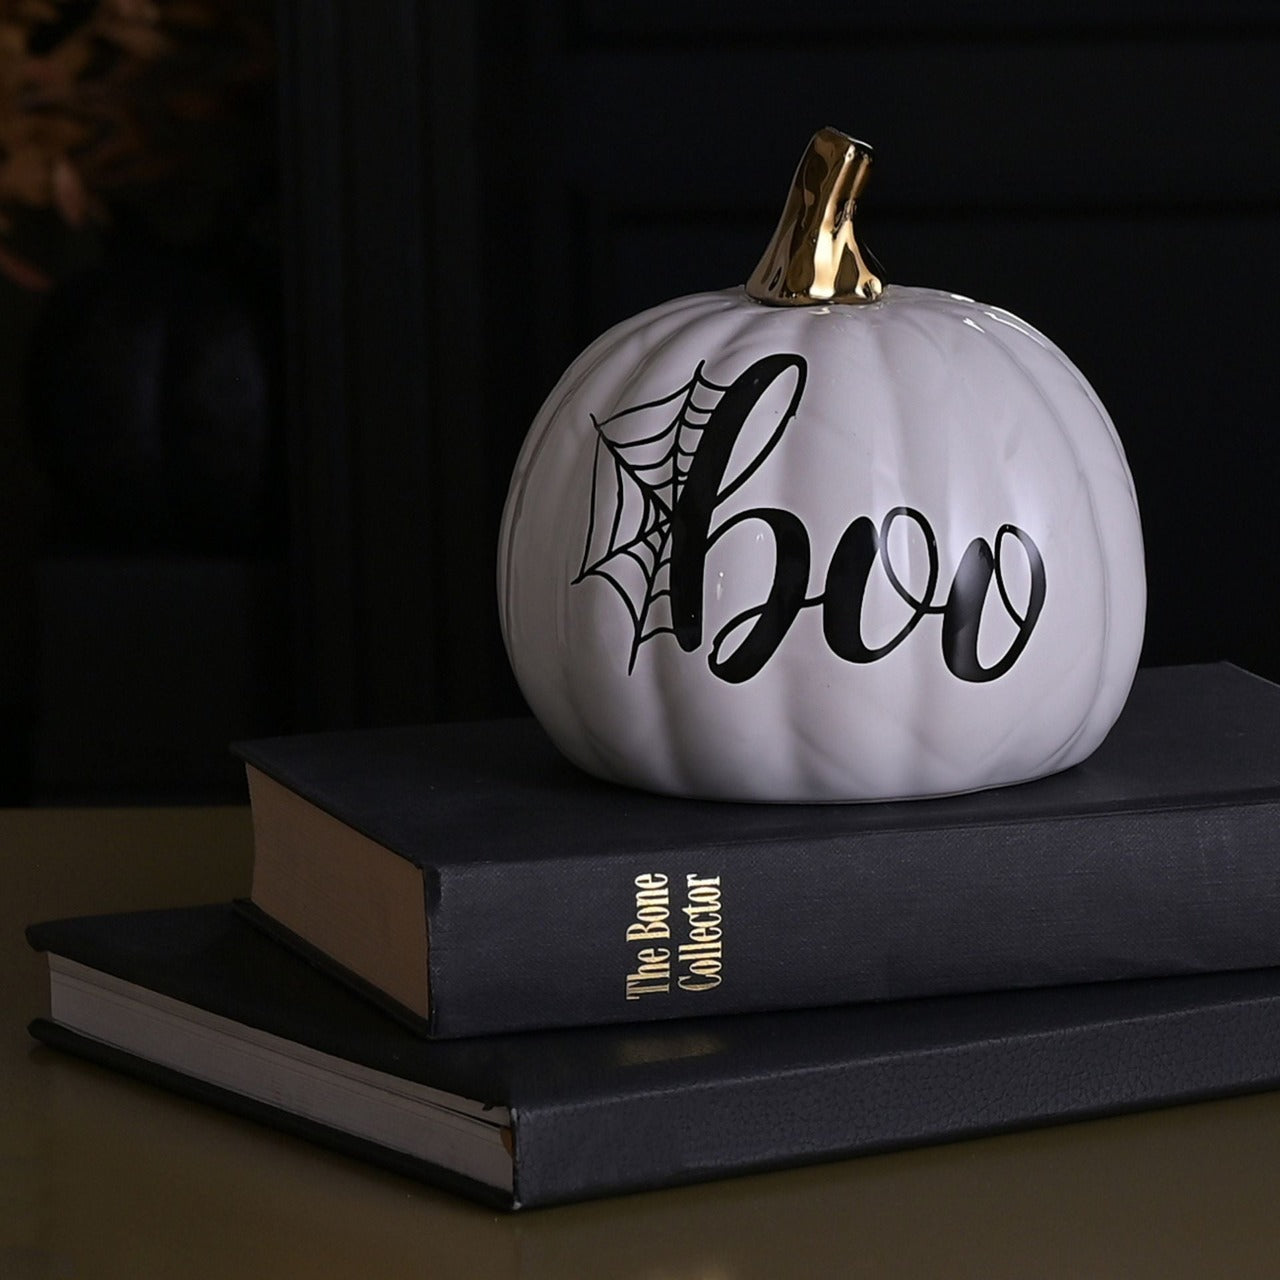 White Pumpkin Halloween Decoration  A white pumpkin decoration by THE SEASONAL GIFT CO®.  This spooky pumpkin will add to the spinetingling atmosphere of haunted houses this Halloween.